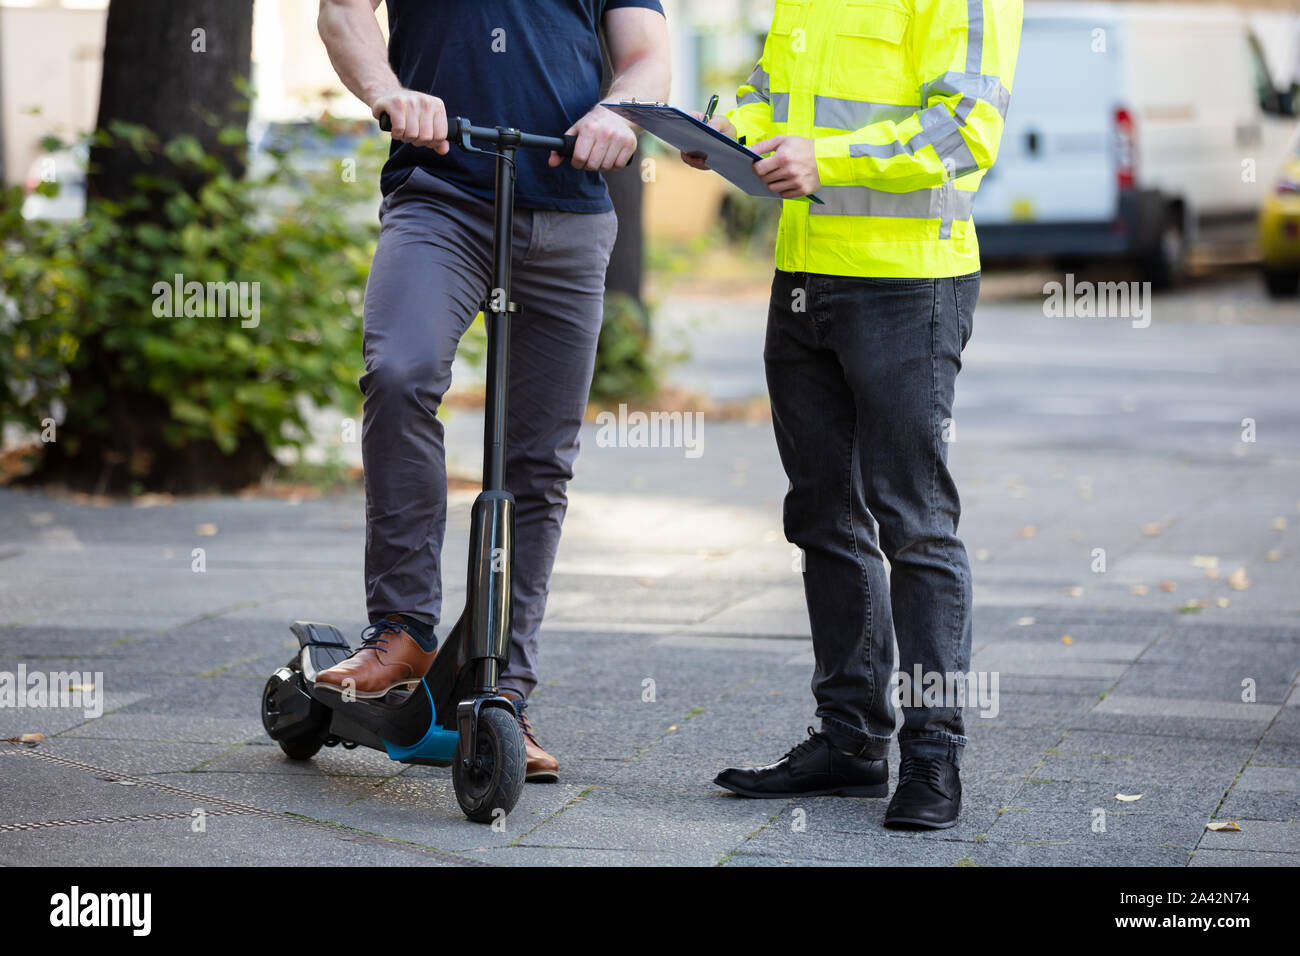 Officer Holding Clipboard In Hand Standing With Man Riding Electric Scooter On City Street Stock Photo